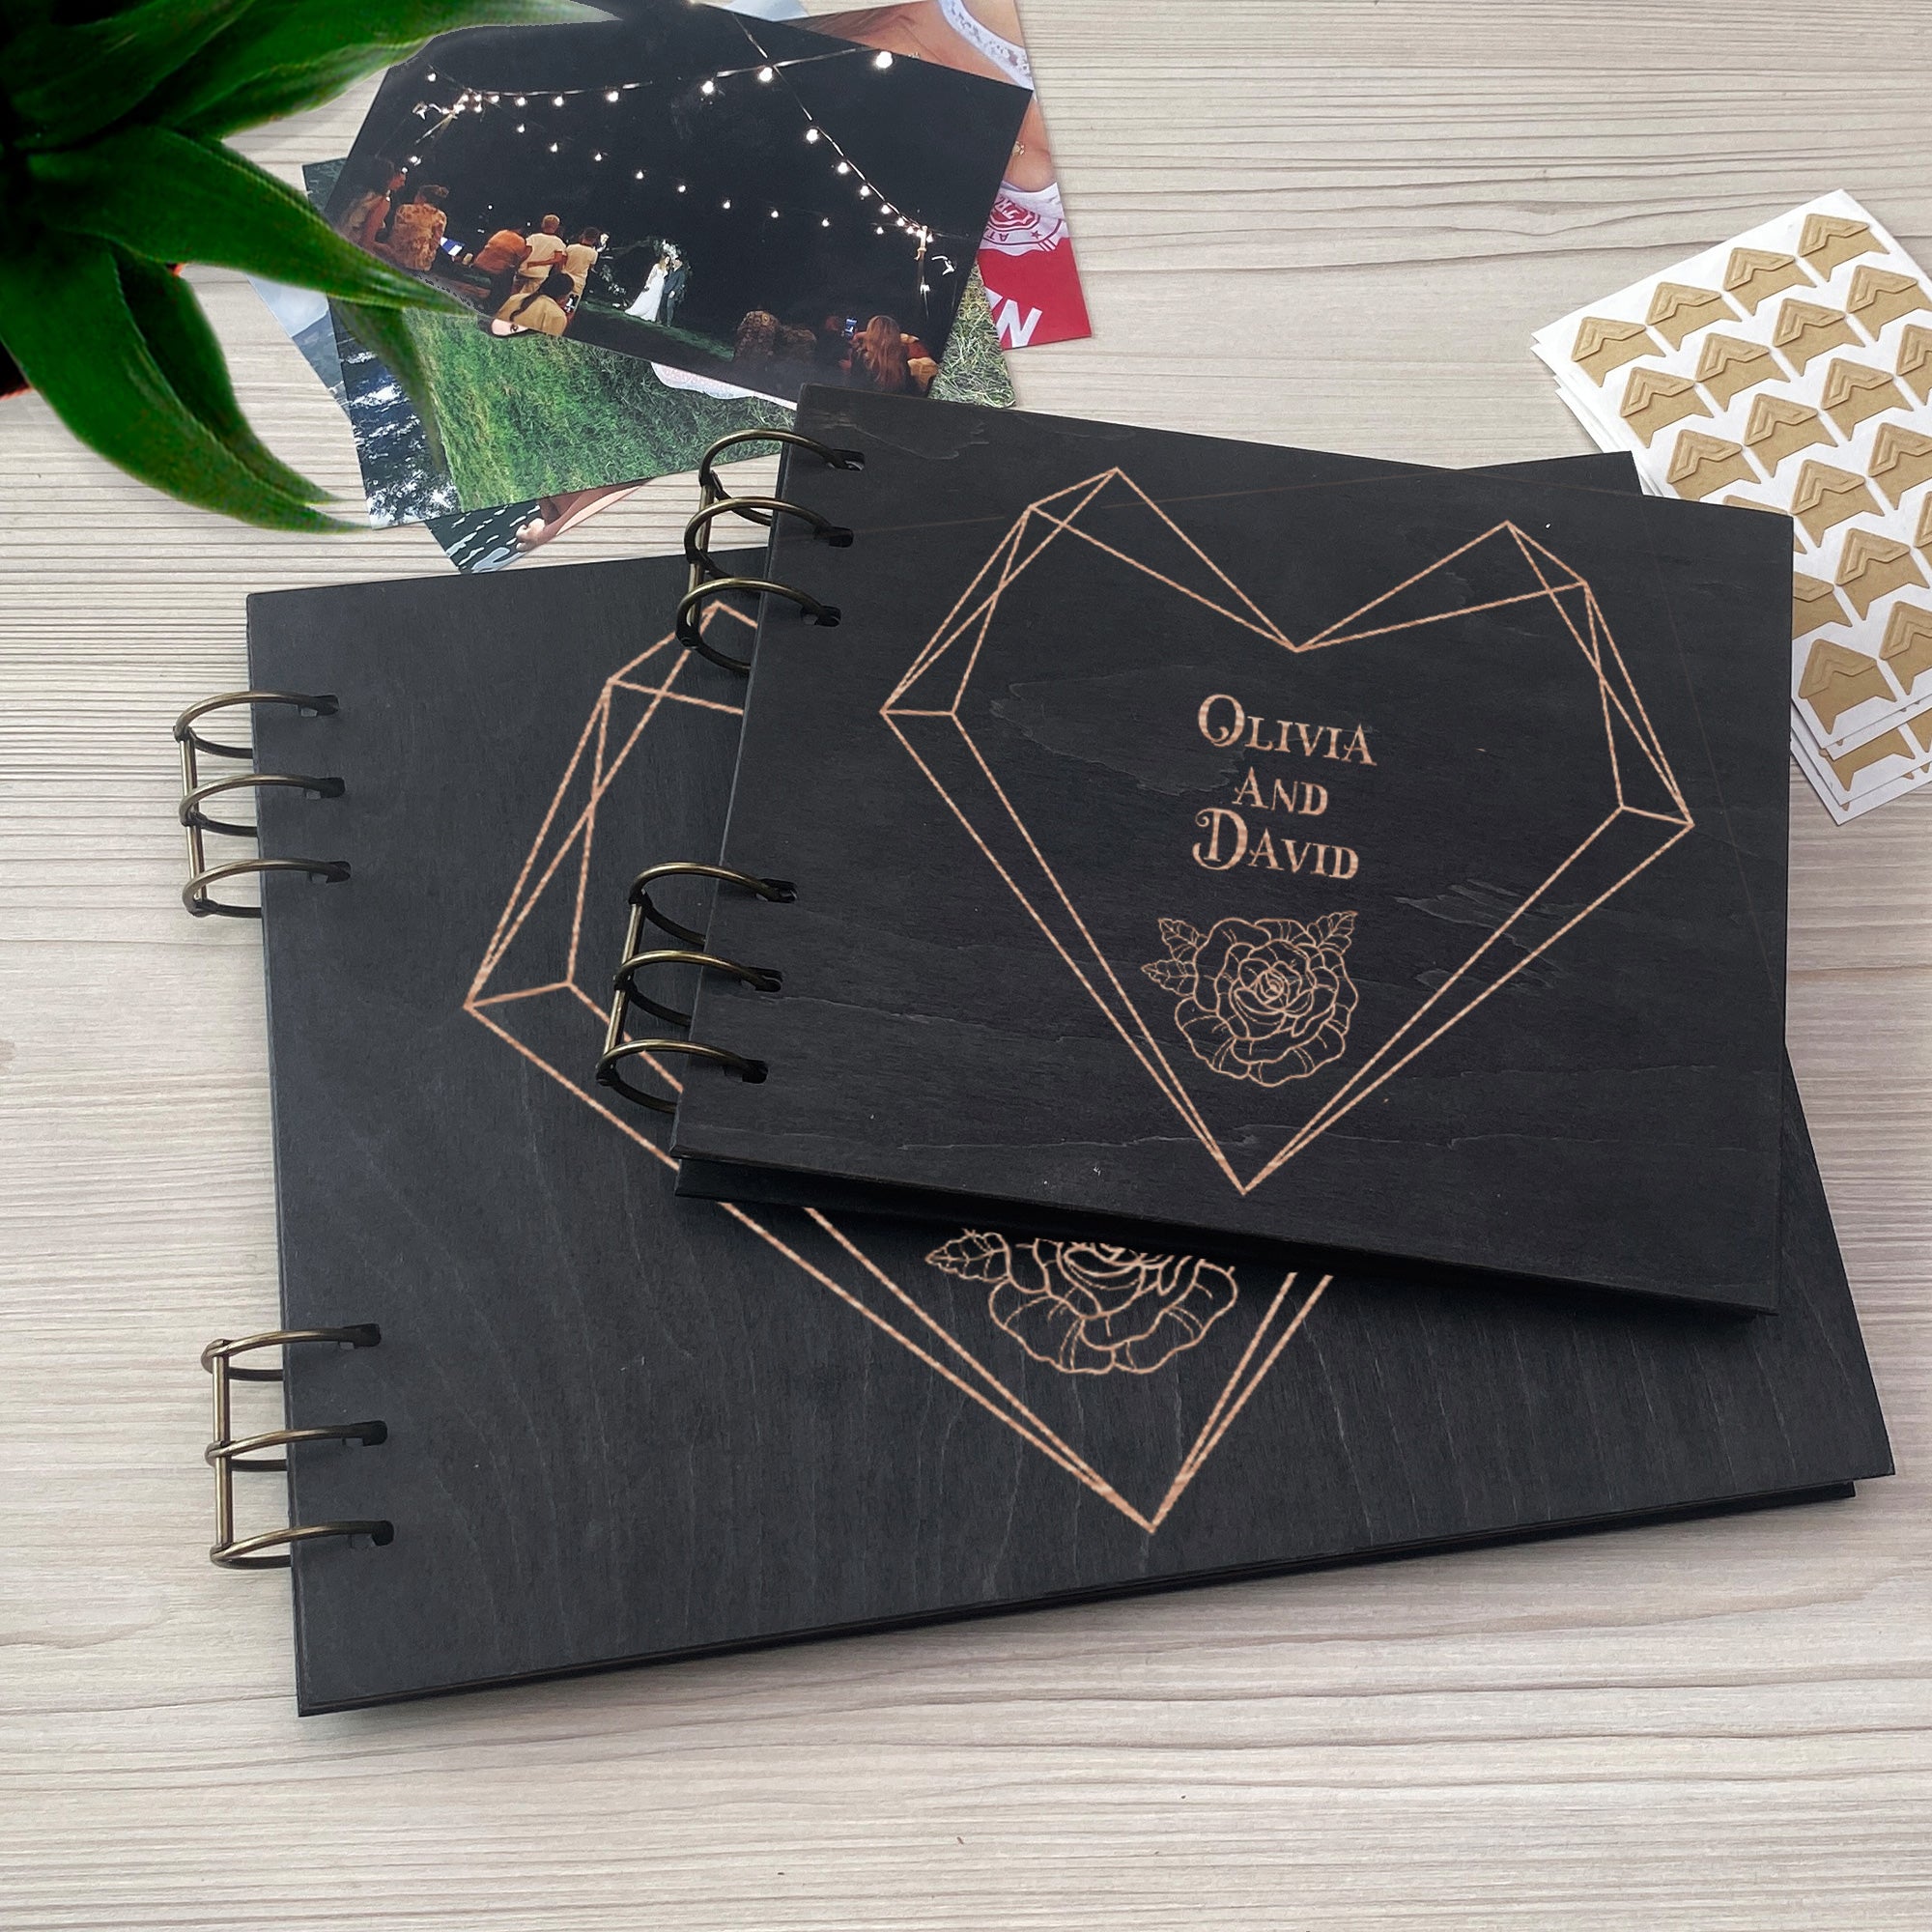 Personalized photo album cover and Geometric Heart map engraving